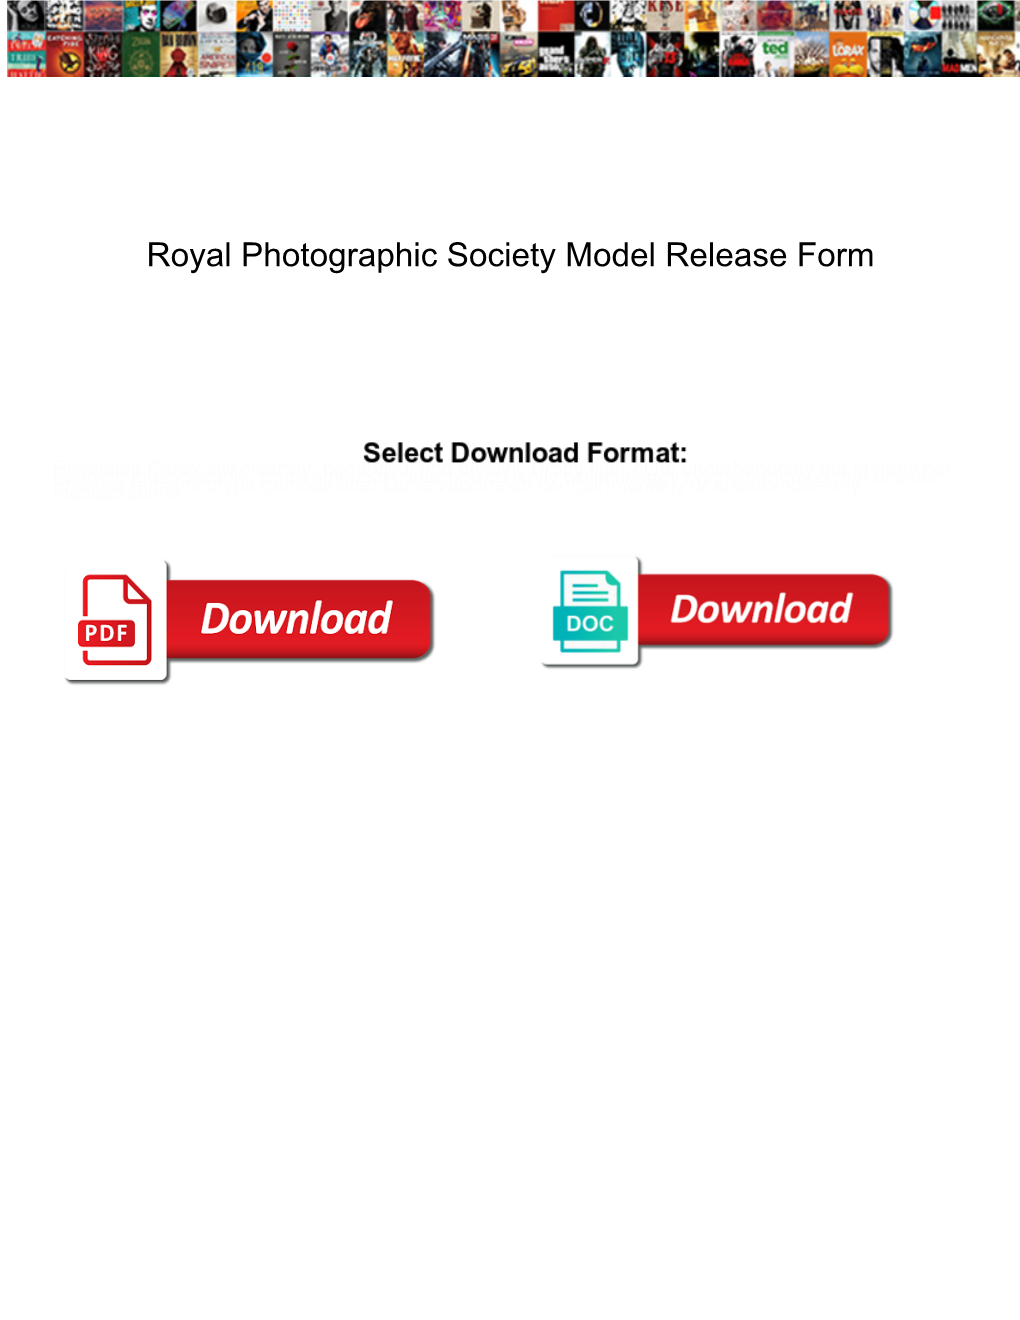 Royal Photographic Society Model Release Form